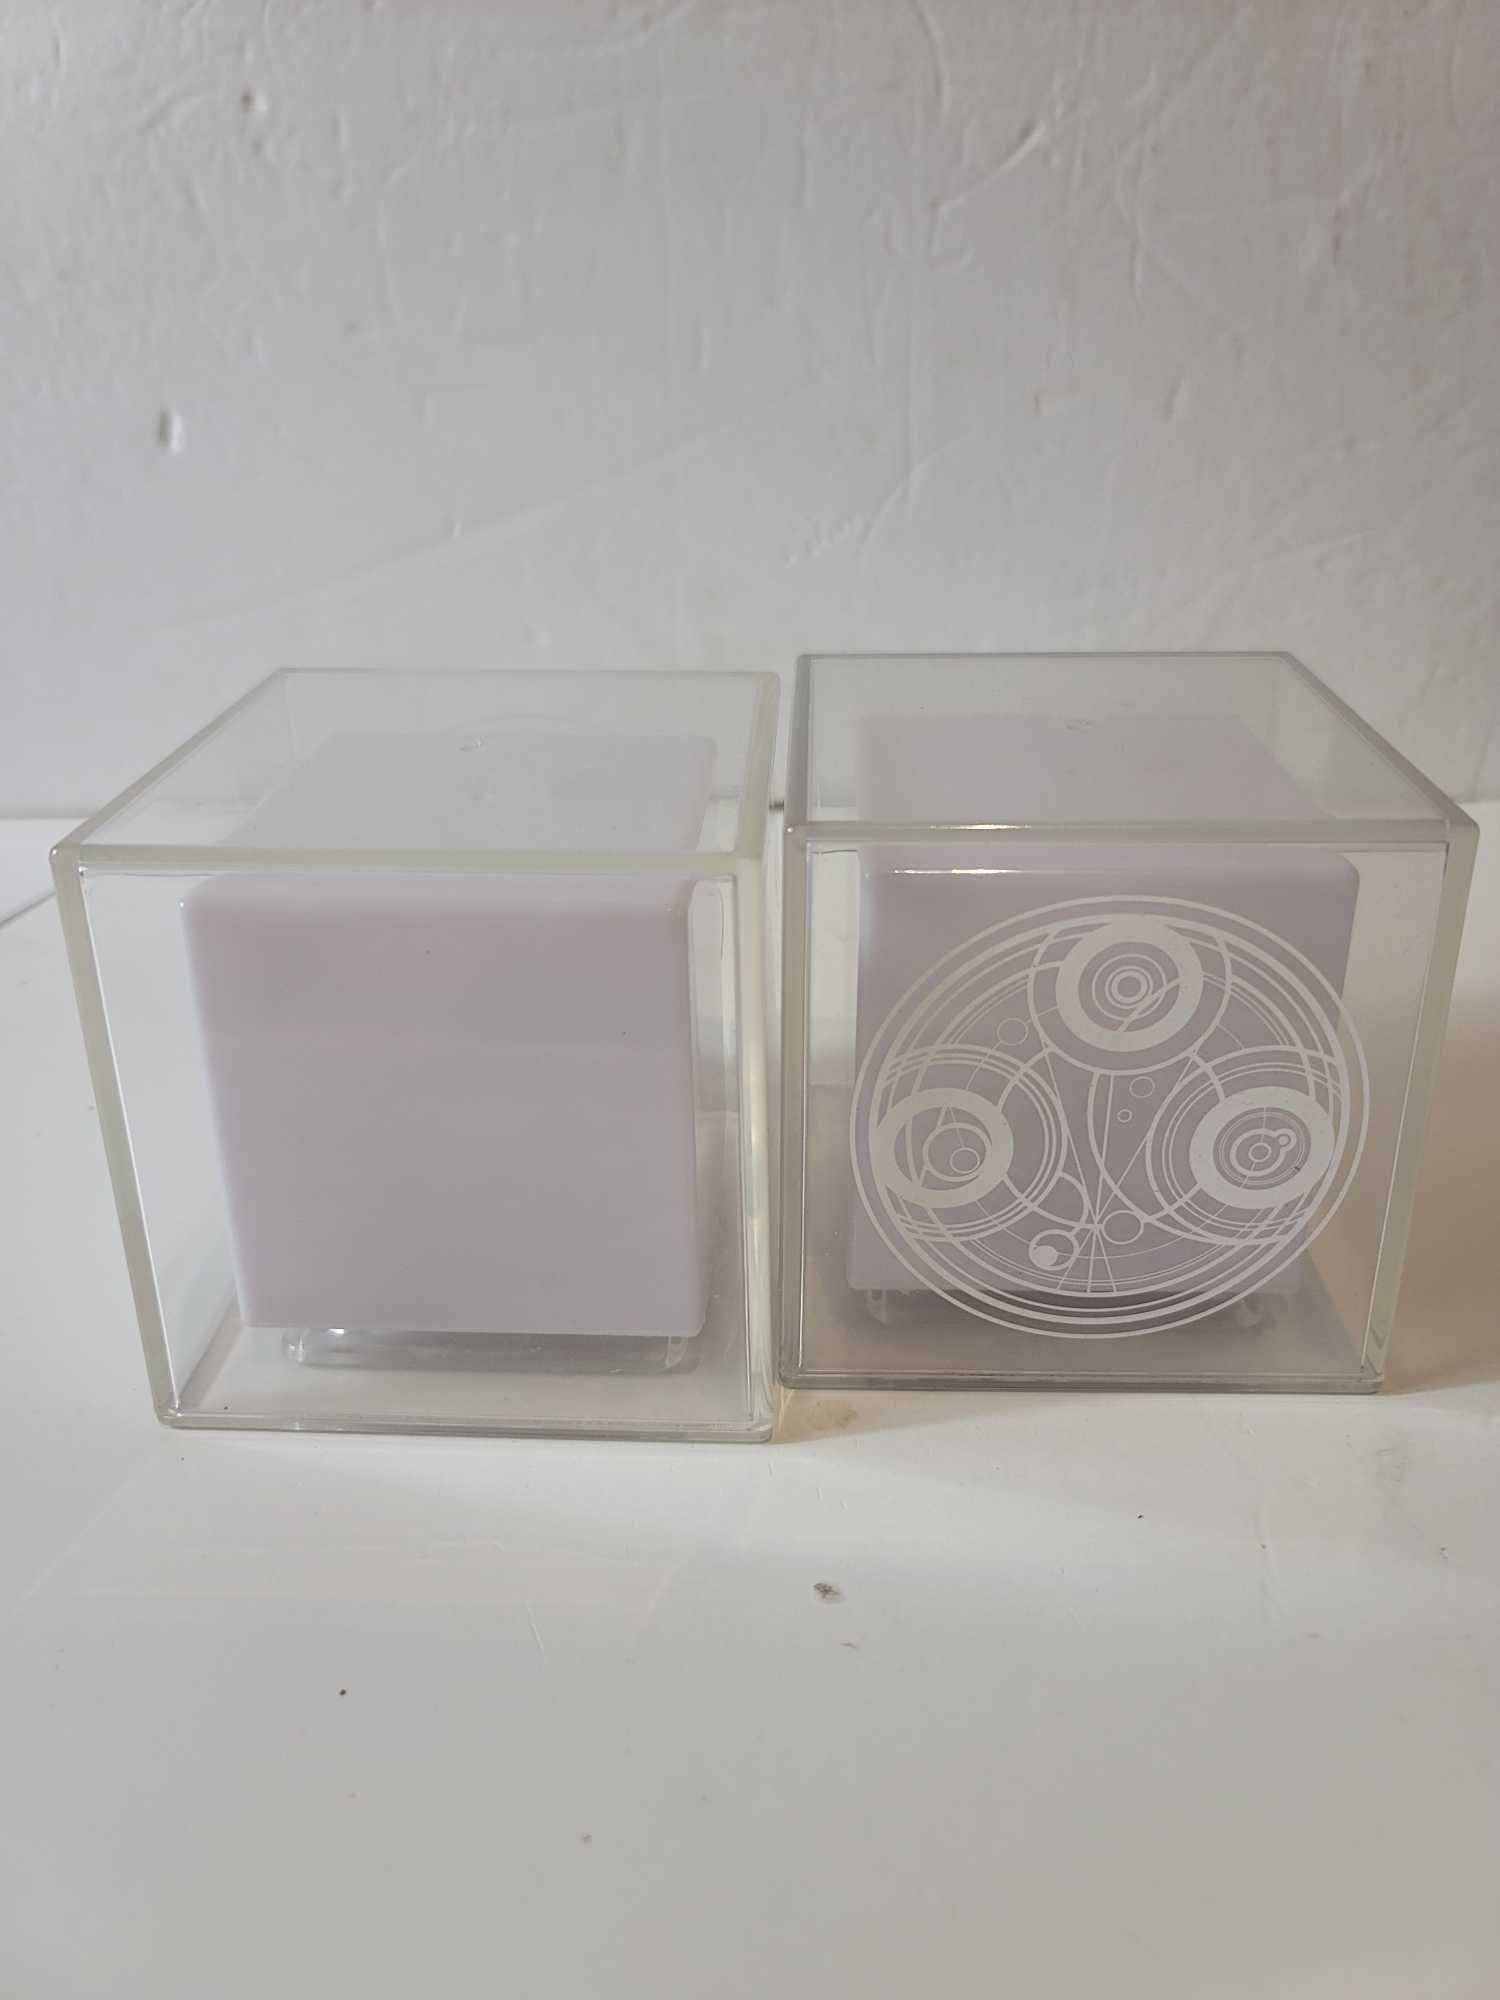 SET OF (2) DOCTOR WHO TIME LORD PSYCHIC CONTAINER WITH MOTION ACTIVATED COLOR CHANGING LIGHTS. EACH